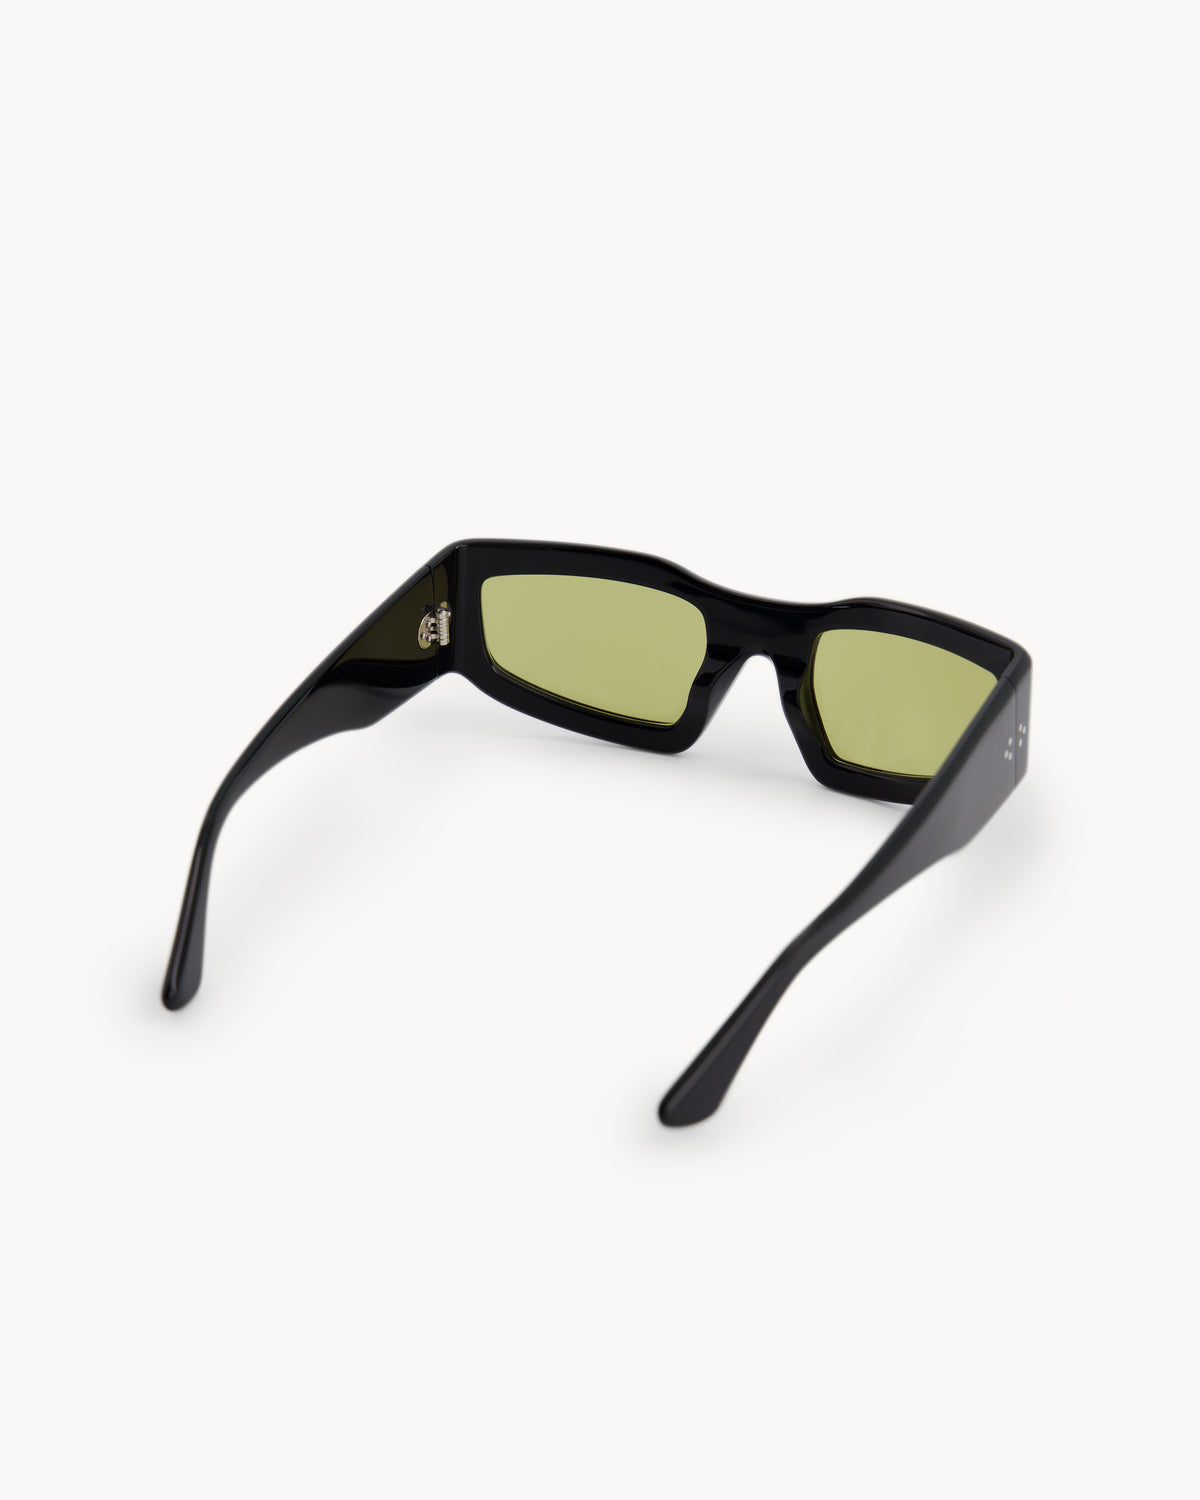 Port Tanger Andalucia Sunglasses in Black Acetate and Warm Olive Lenses 3